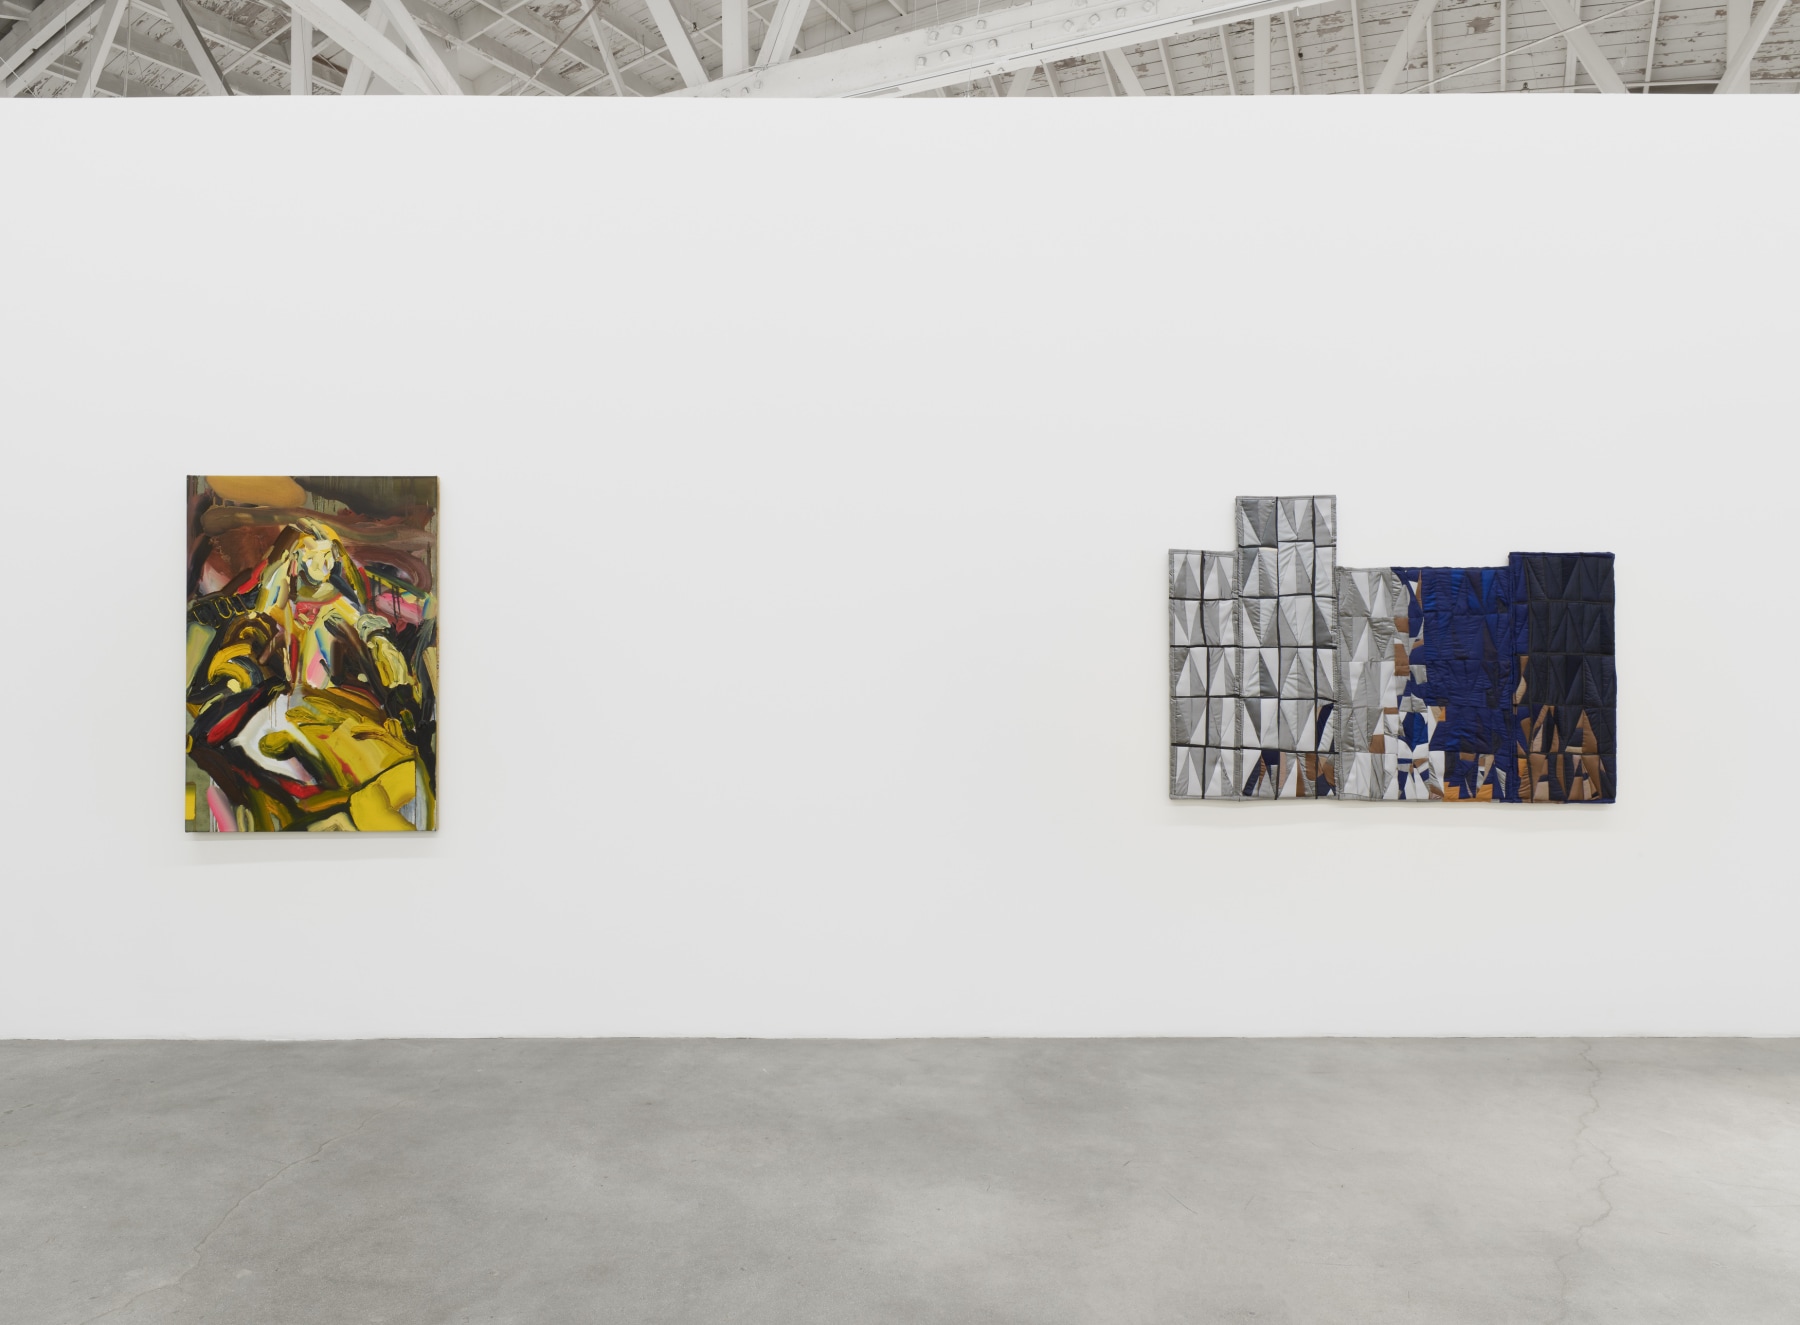 Installation view of Majeure Force, Part Two, featuring works by Andy Woll and Anne Libby.